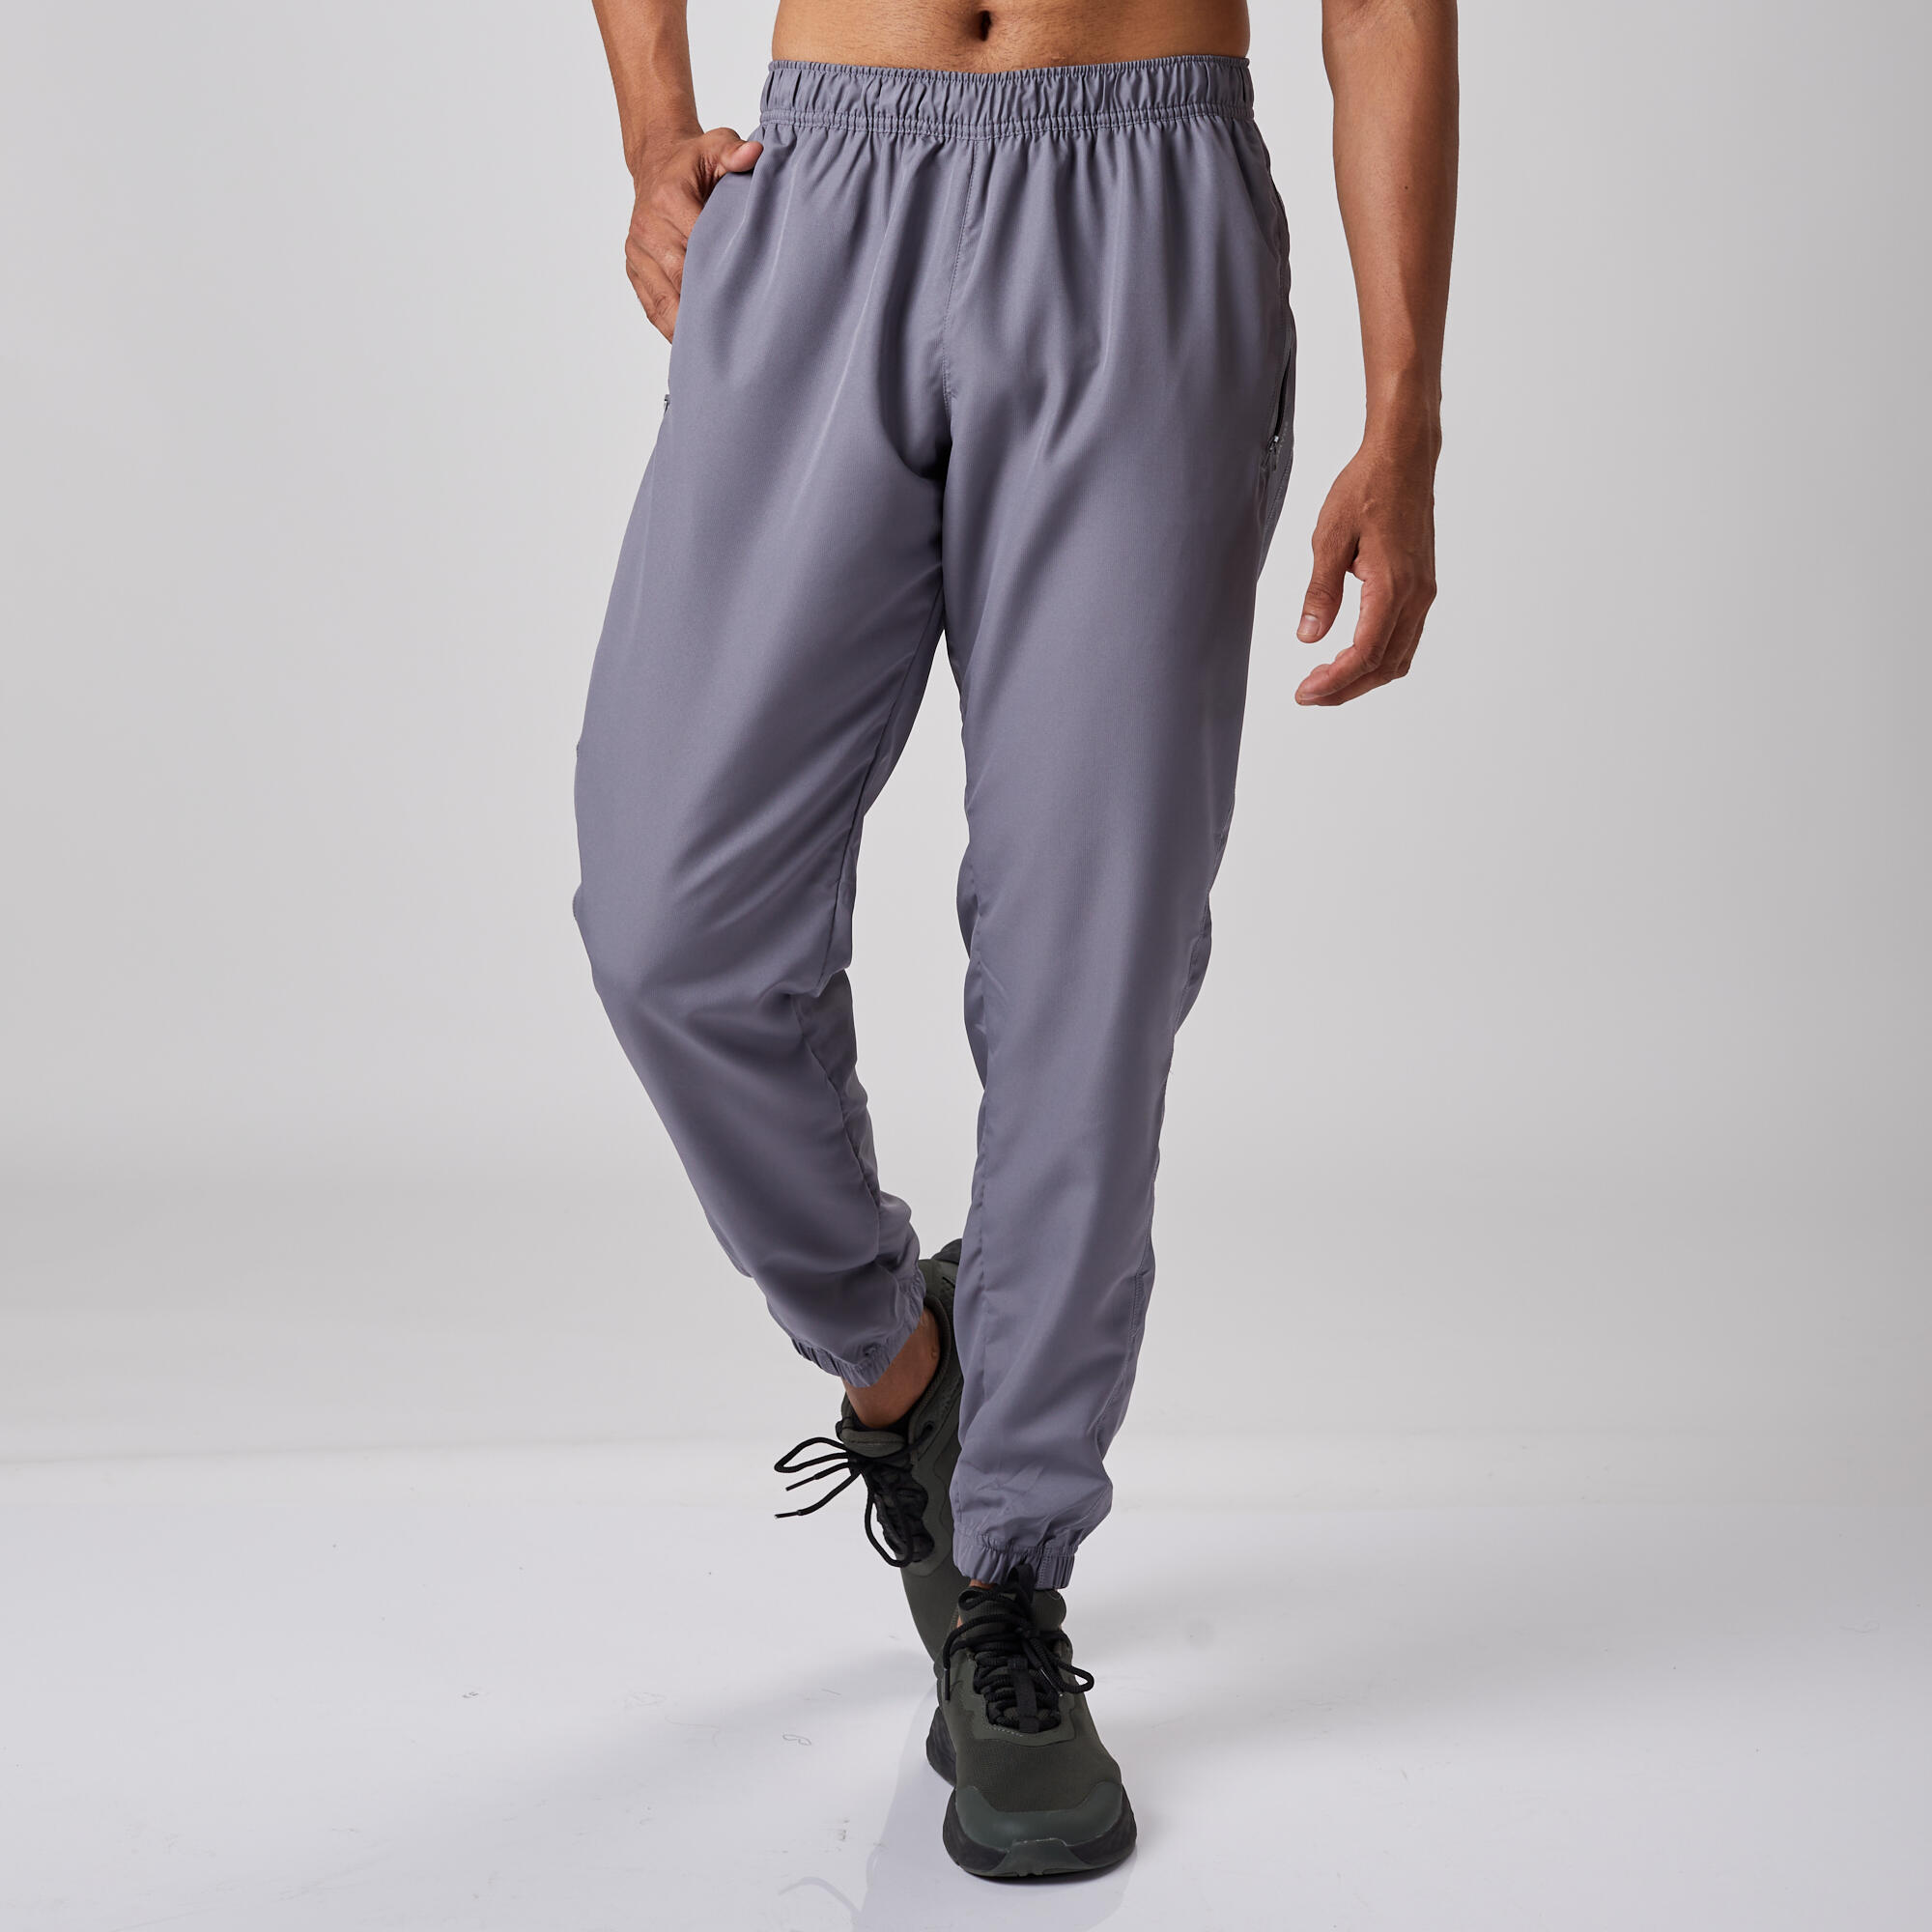 Buy Black Track Pants for Men by GAS Online | Ajio.com